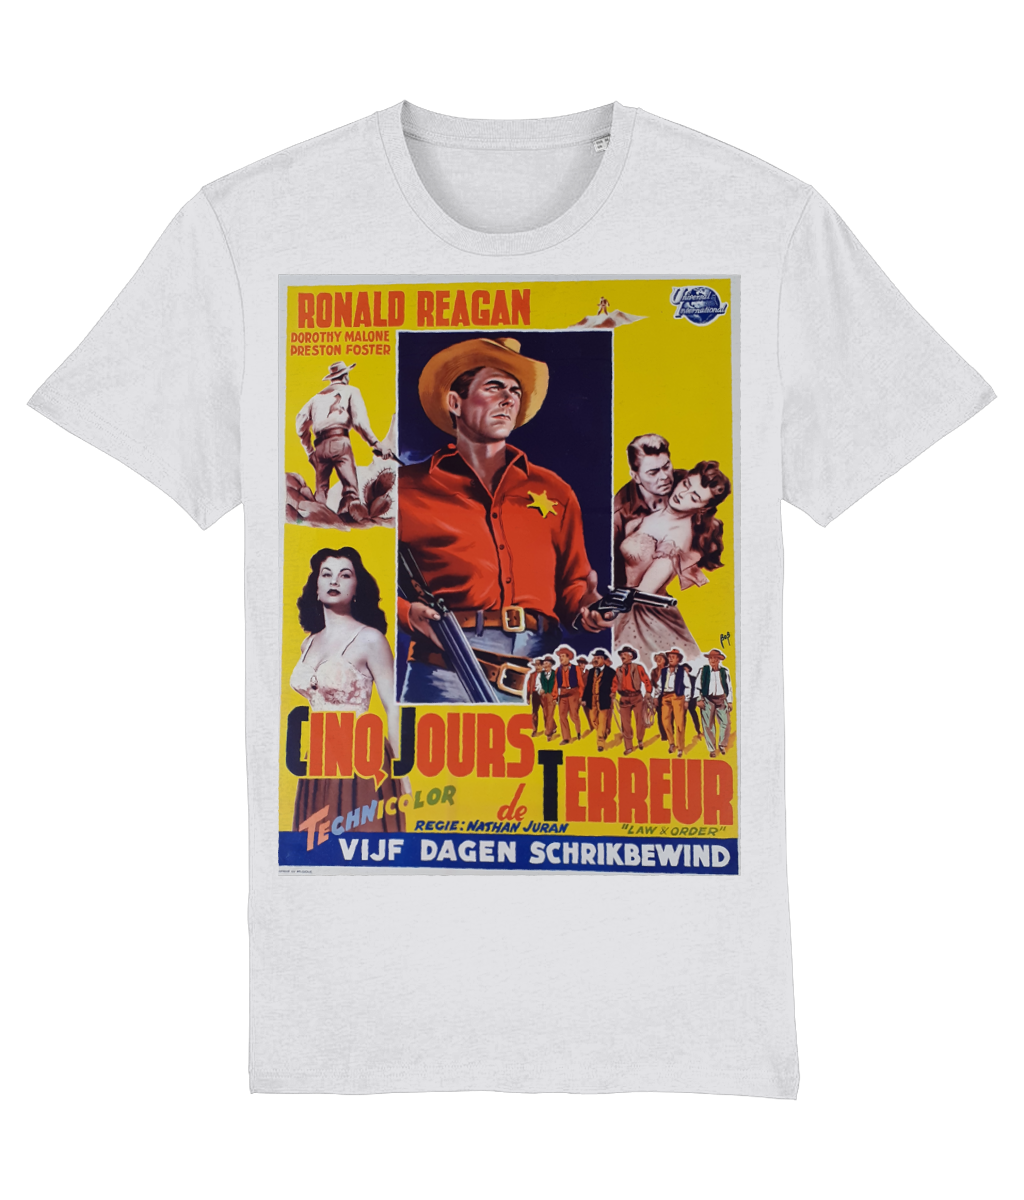 SALE of Ronald Reagan-Cino Jours Terreur-Classic Film Poster Design-GAS T Shirts-FN02